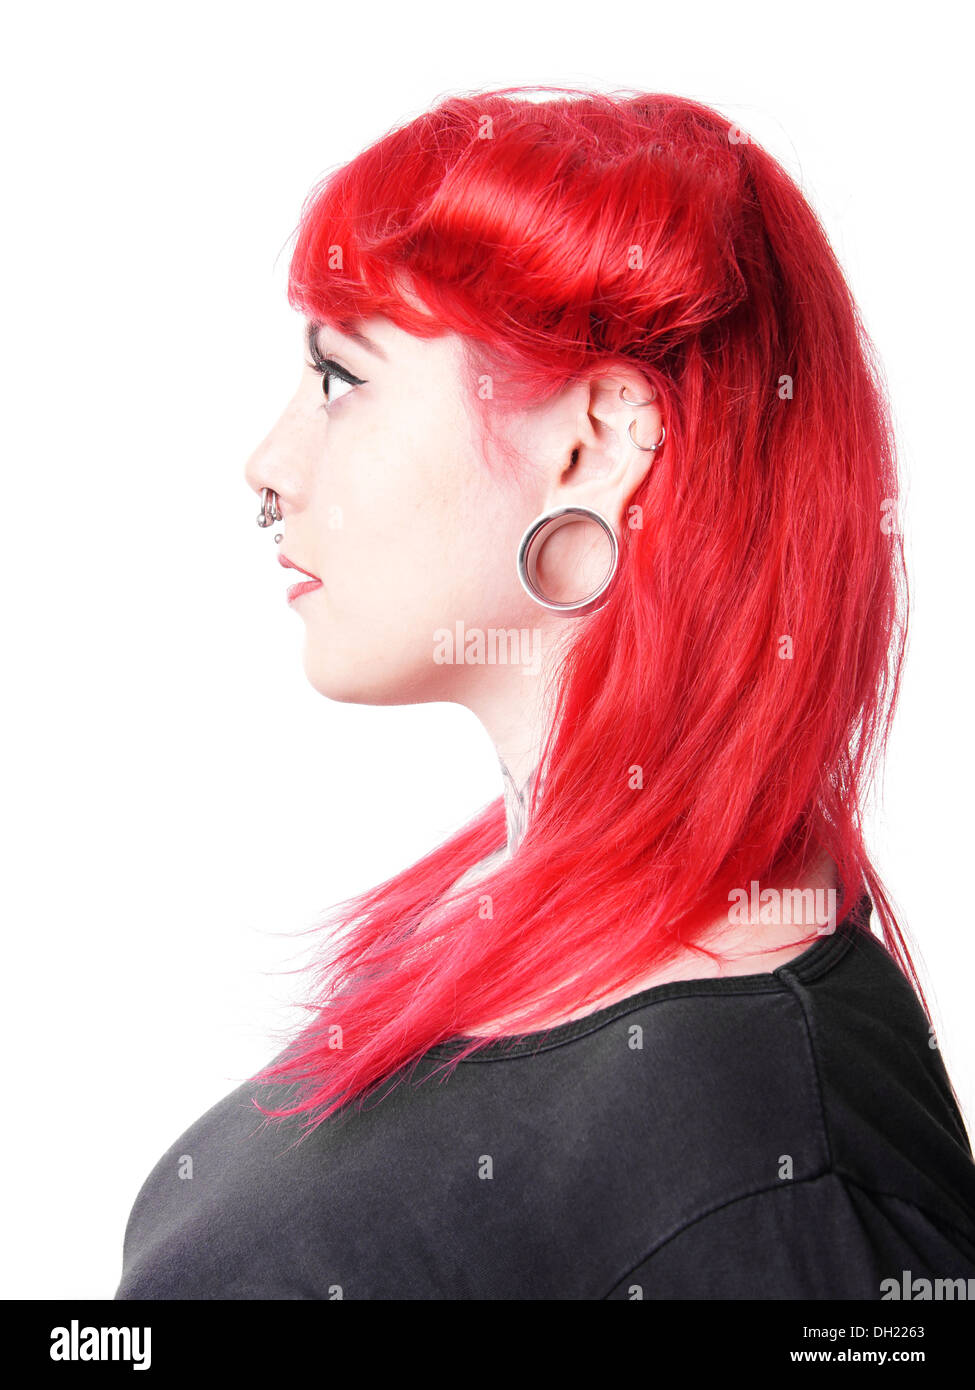 young woman with facial piercings and tattoos Stock Photo